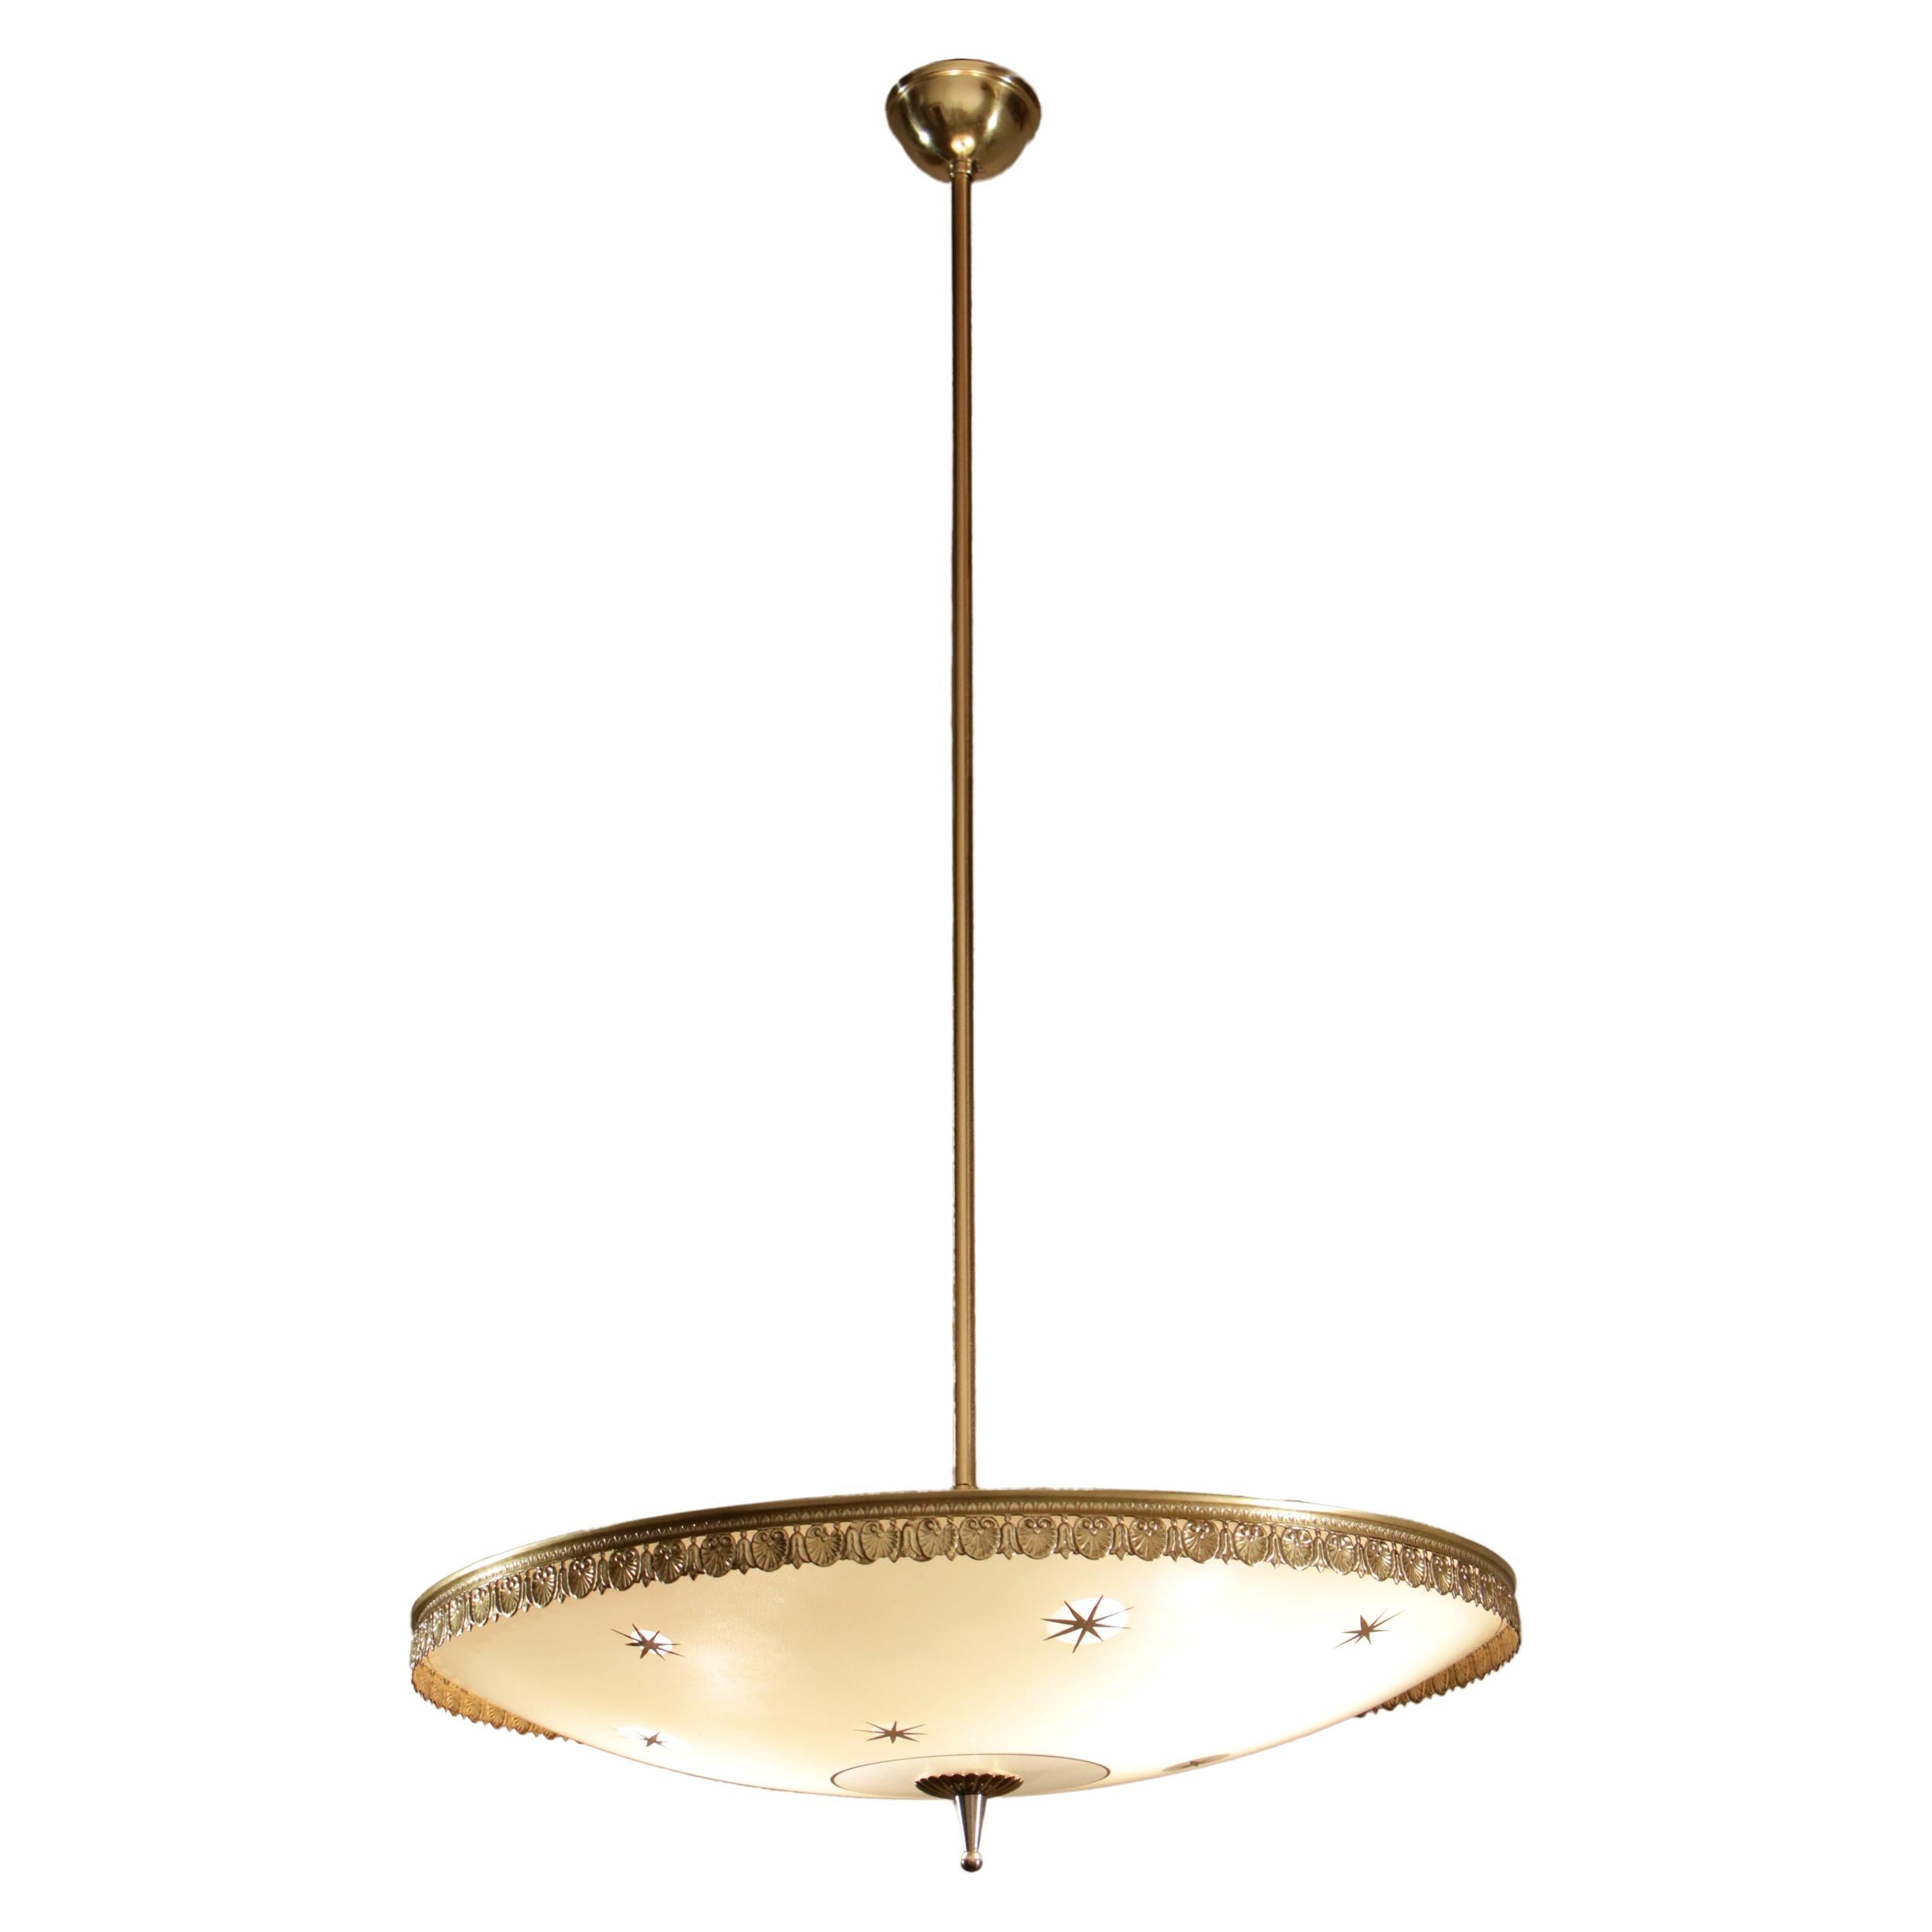 Italian Mid-Century Modern glass disk chandelier from the 1950s, polished brass structure, the shell edging adds decorative flair in glossy nickel. The restoration was made with great care by a specialized craftsman to bring back this piece's